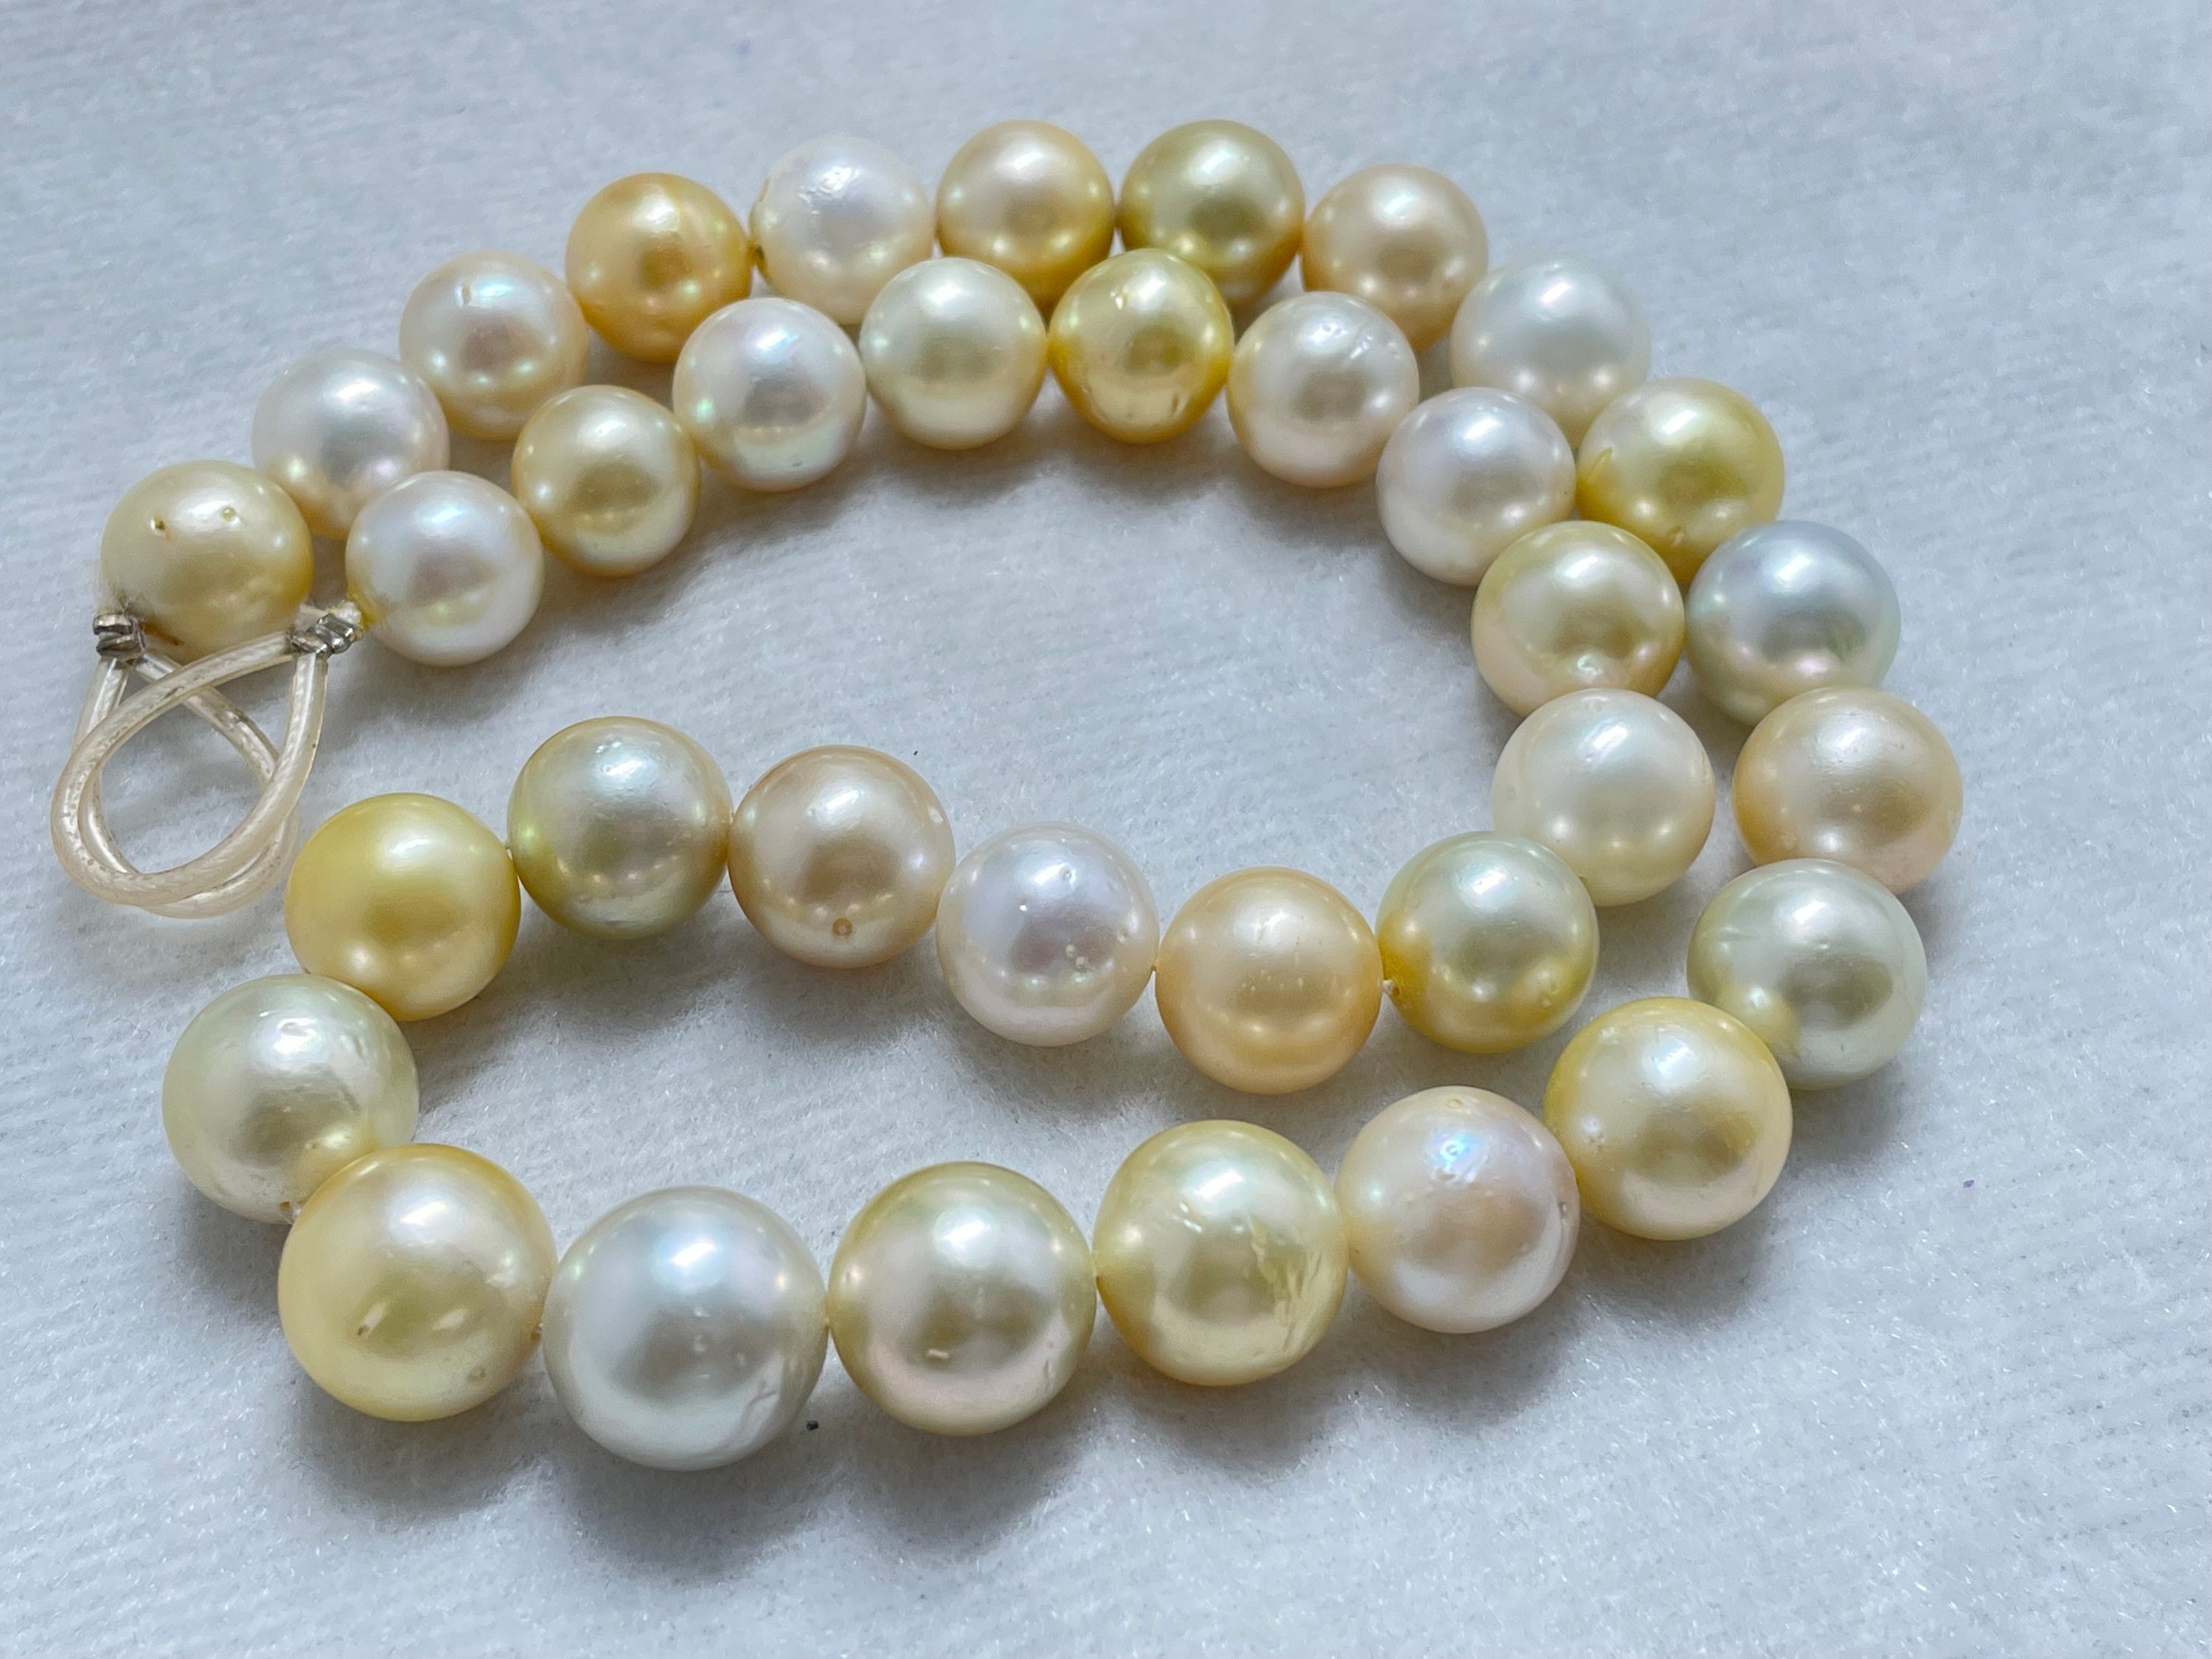 11-13.5 MM approx. Natural Real South Sea Pearl Necklace Size Round Shape  Light Golden Color Pearl String Luster Good Personalized Gift 